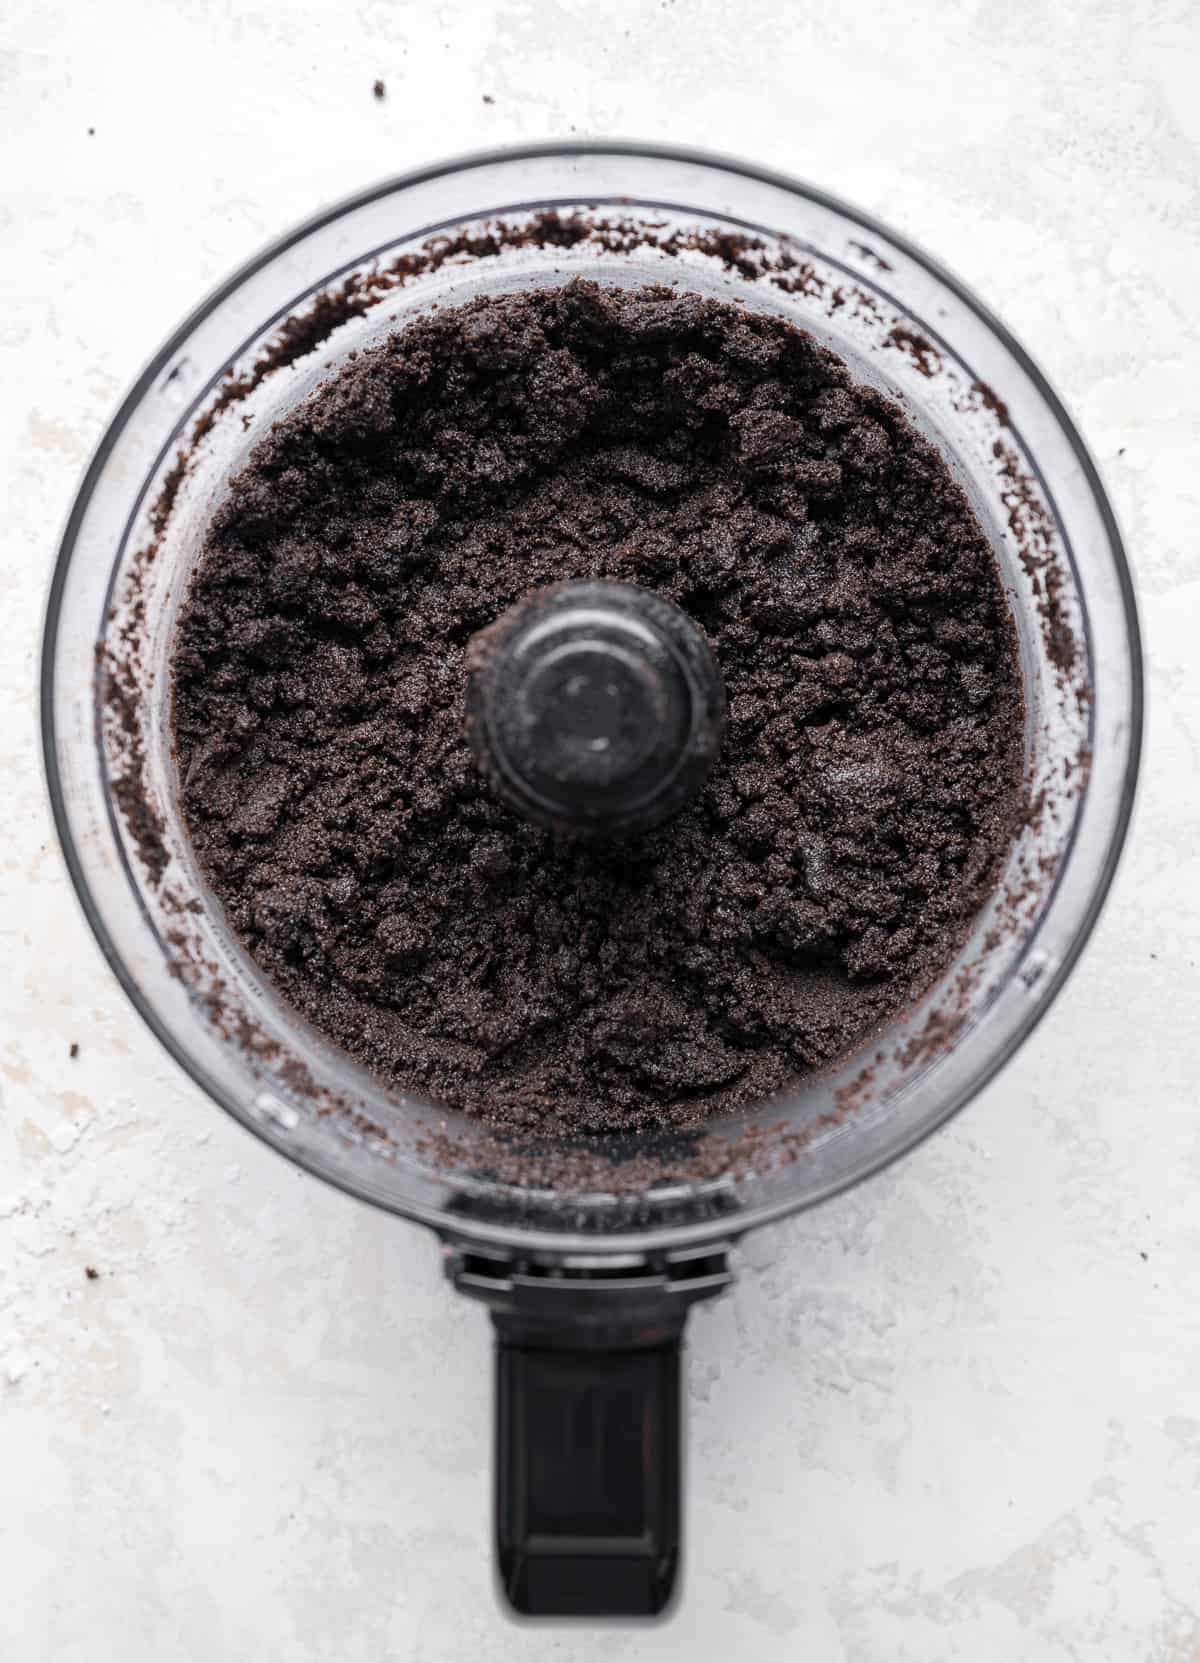 crushed/blended oreos in a food processor